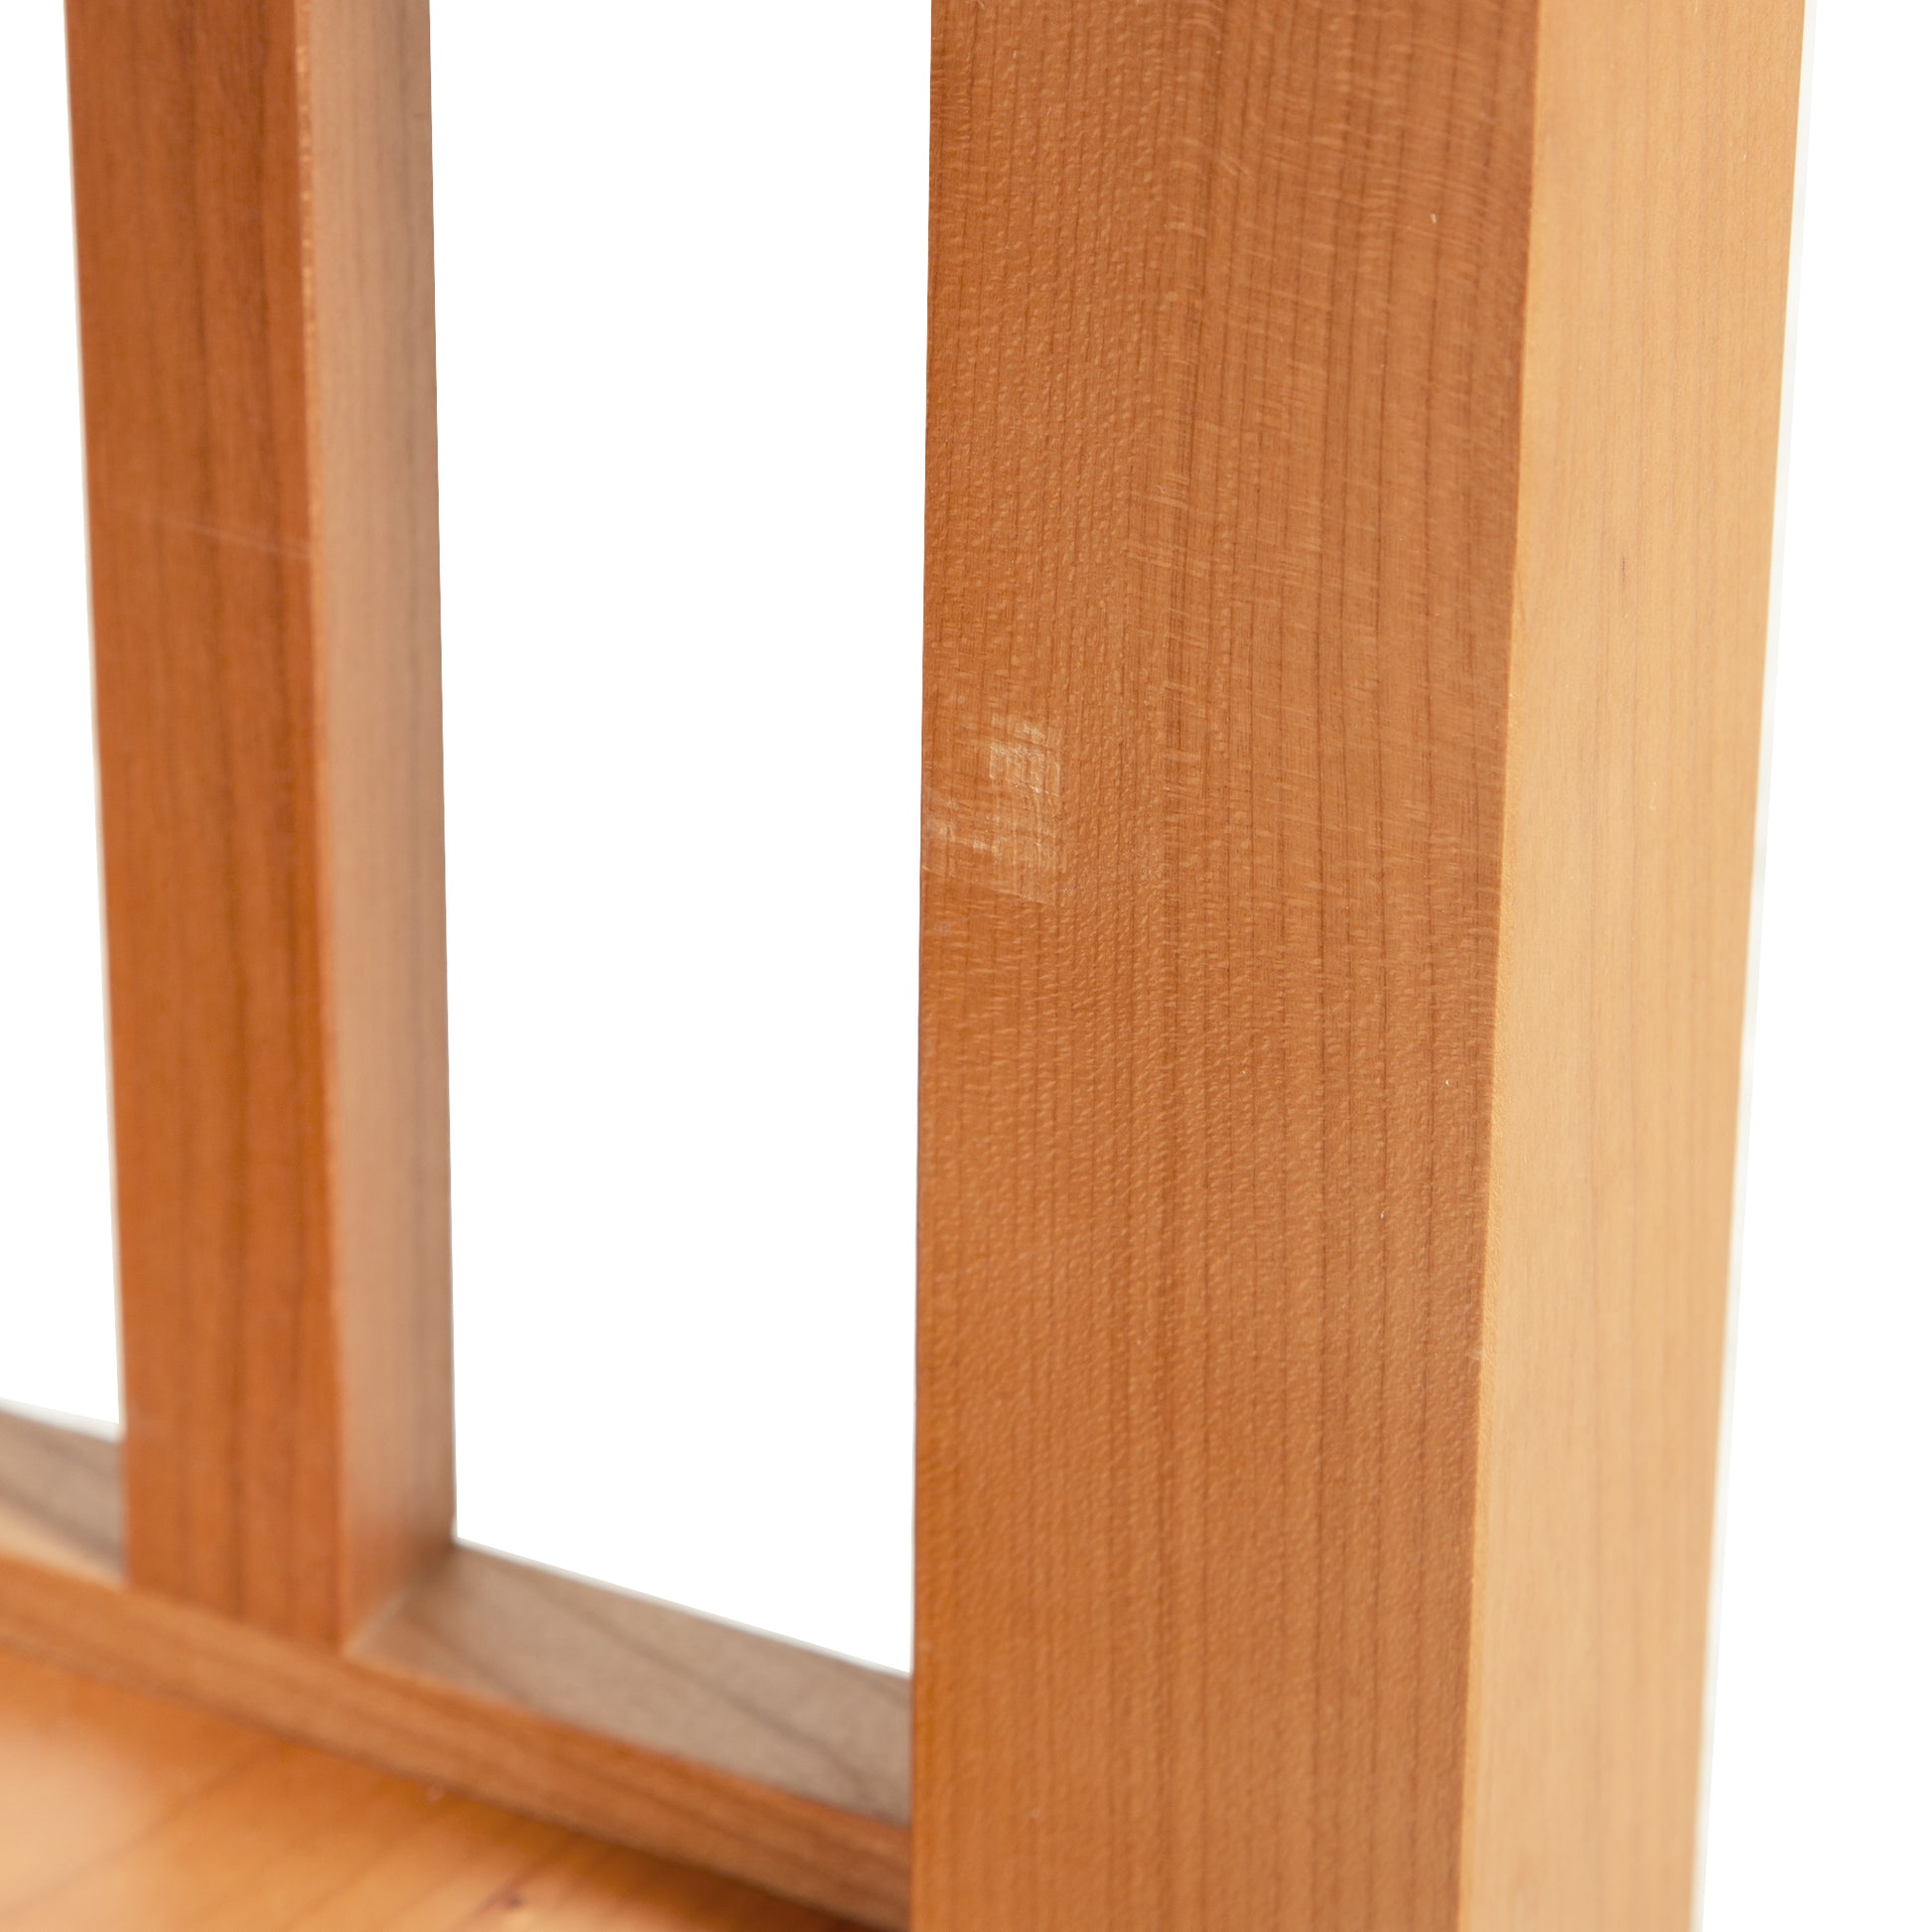 A close up of an American Mission End Table with Shelf - Clearance by Lyndon Furniture, handmade wooden shelf with a natural finish.